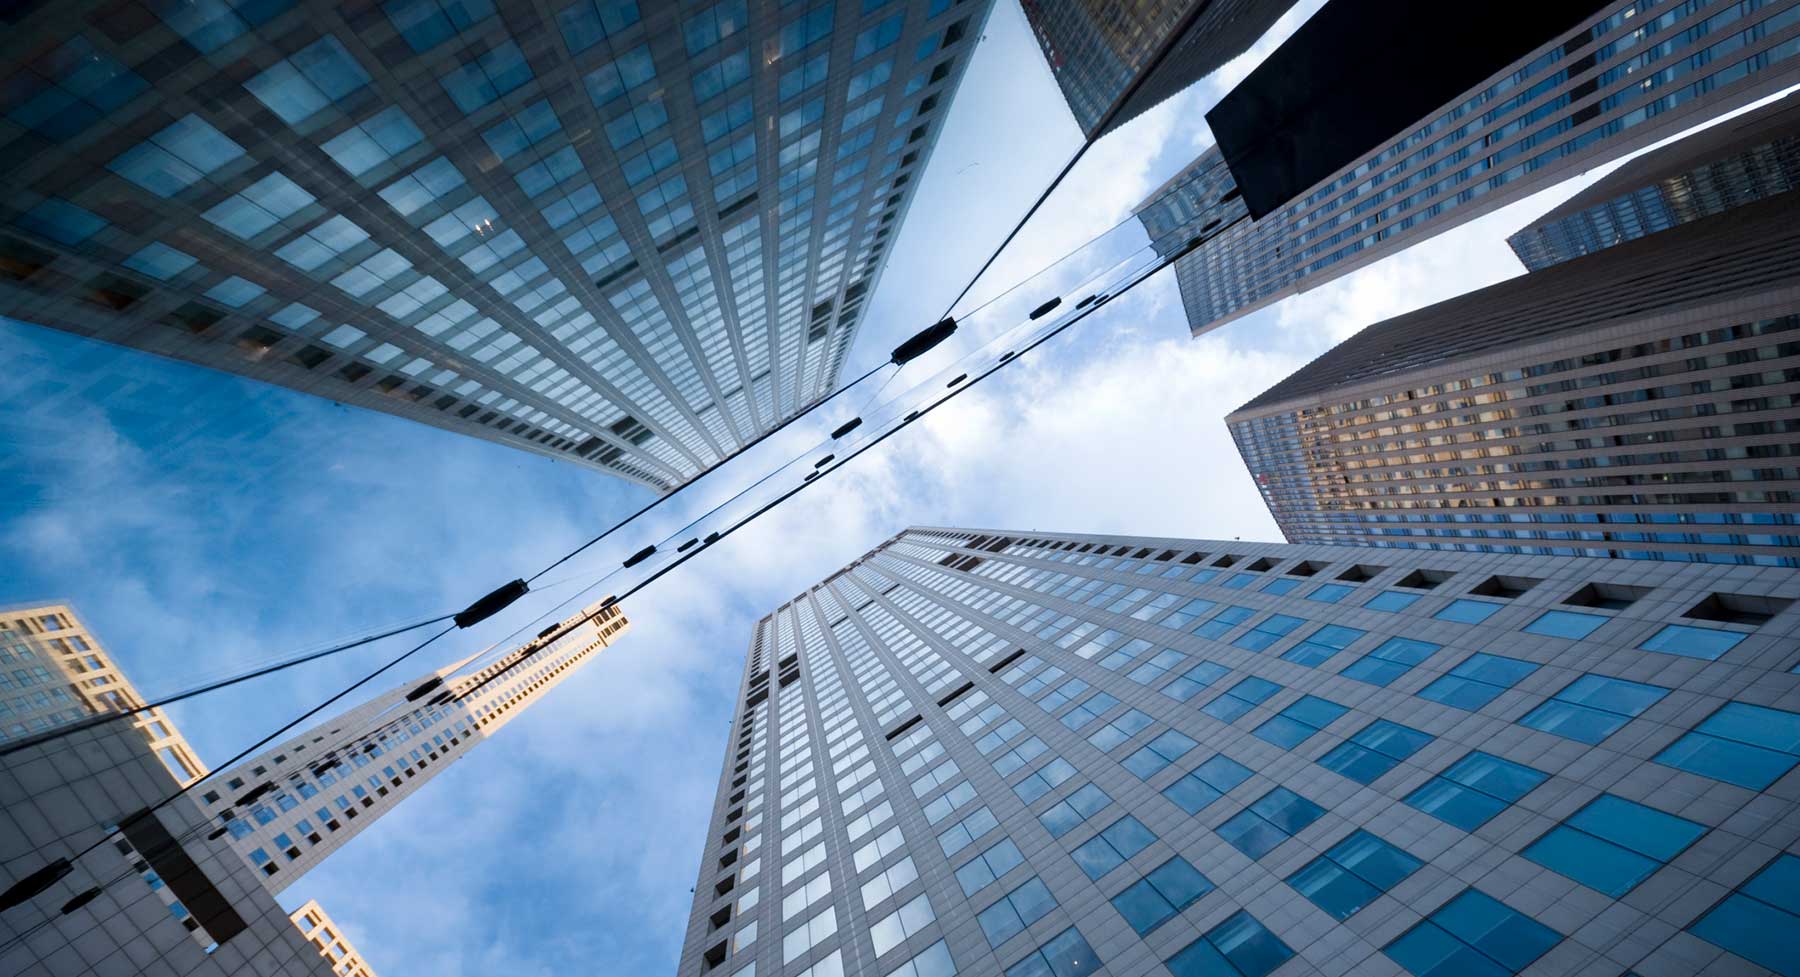 upward view of skyscrapers against a blue sky